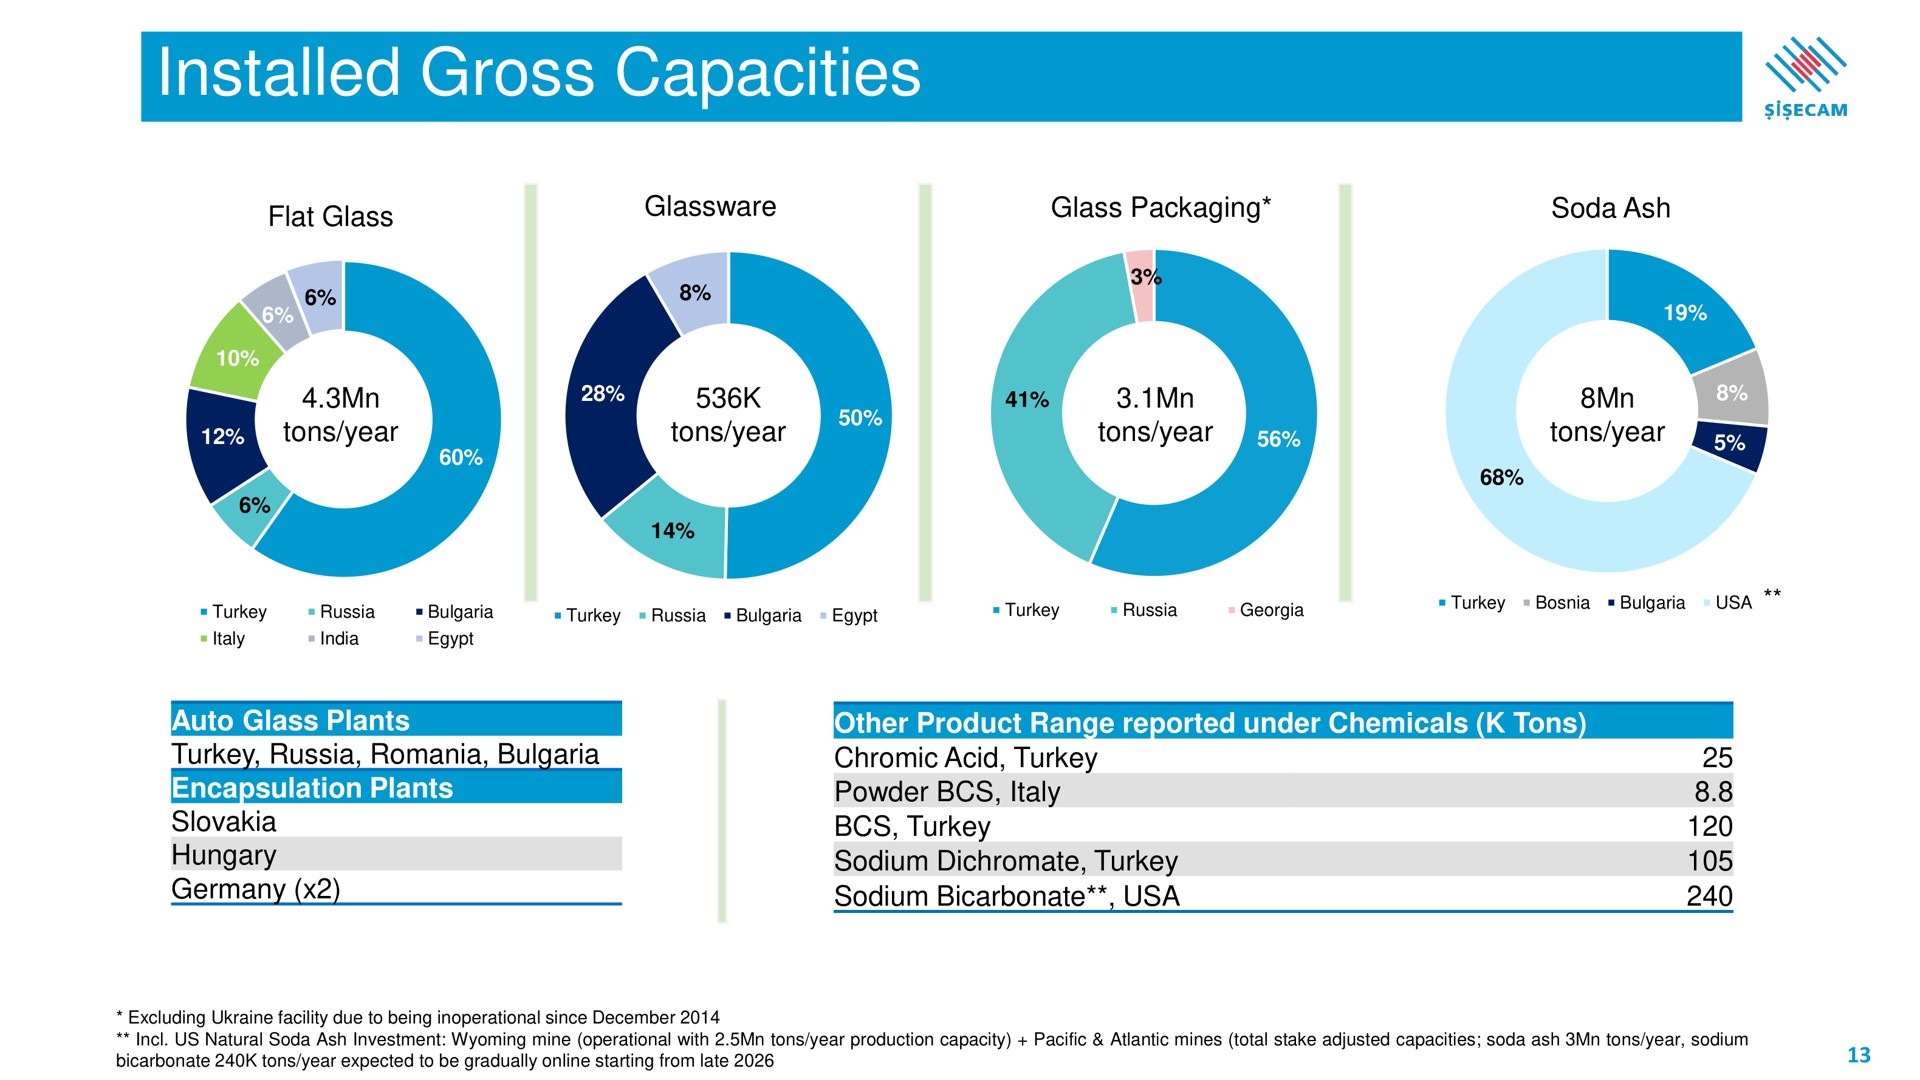 gross capacities | Sisecam Resources